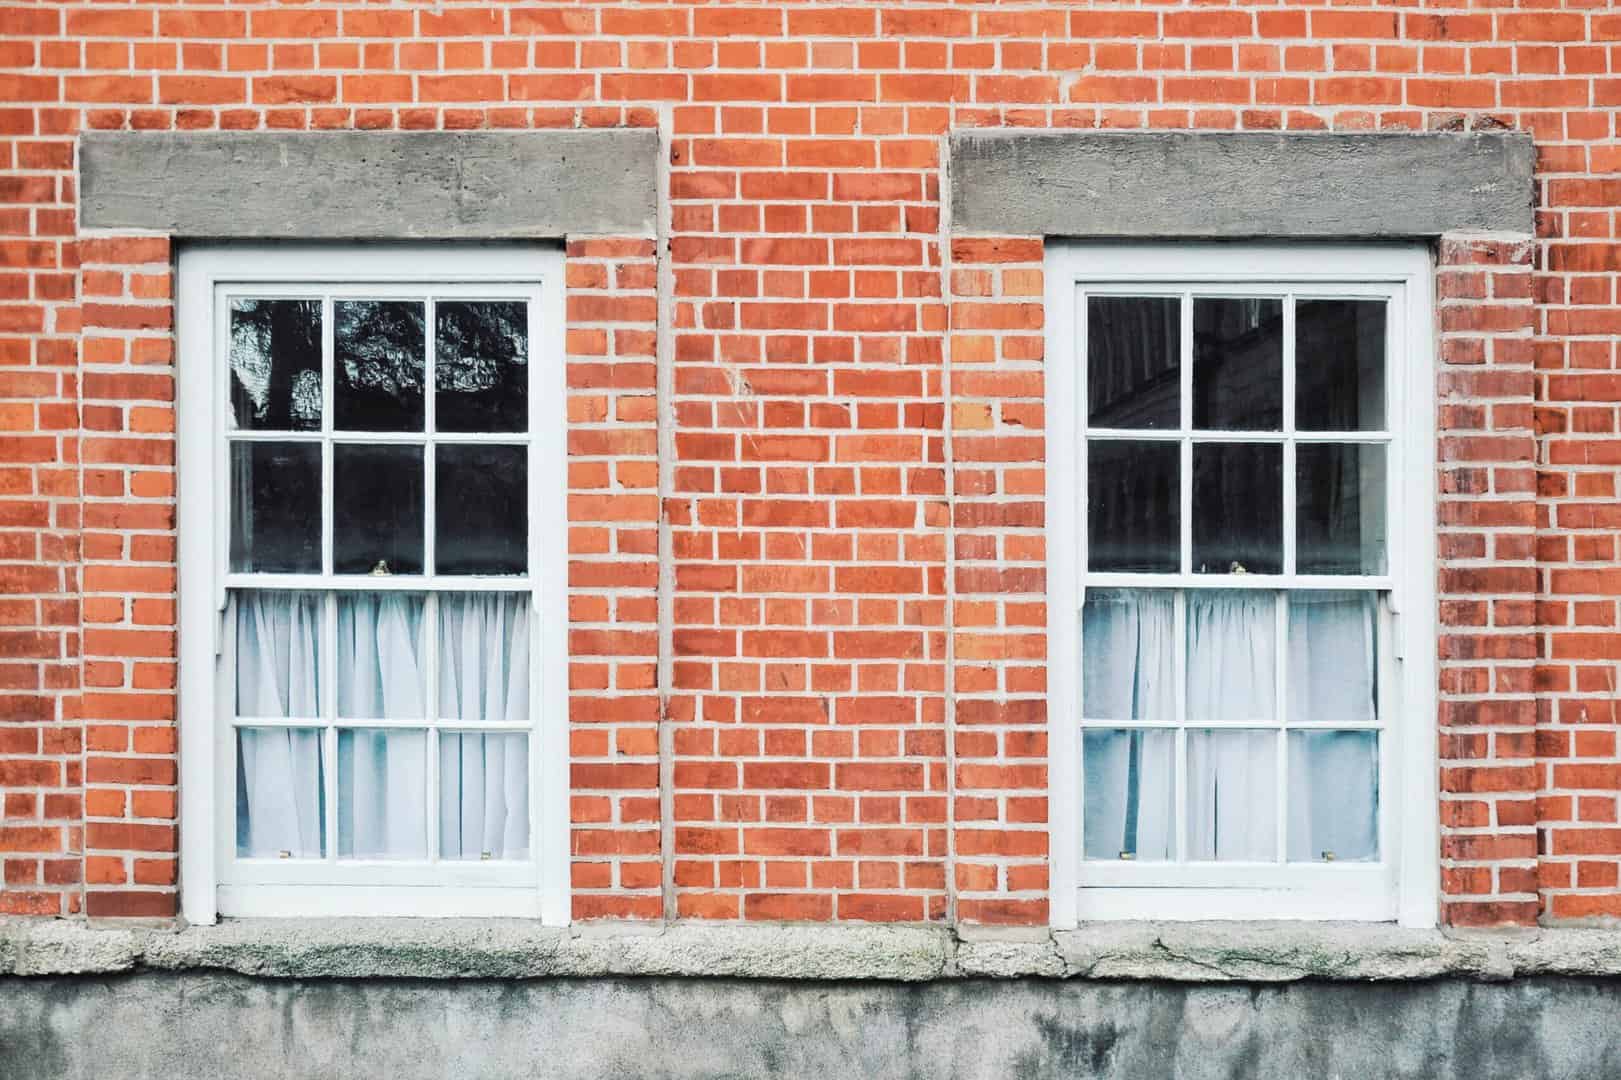 A brick building in Charlotte with two windows.